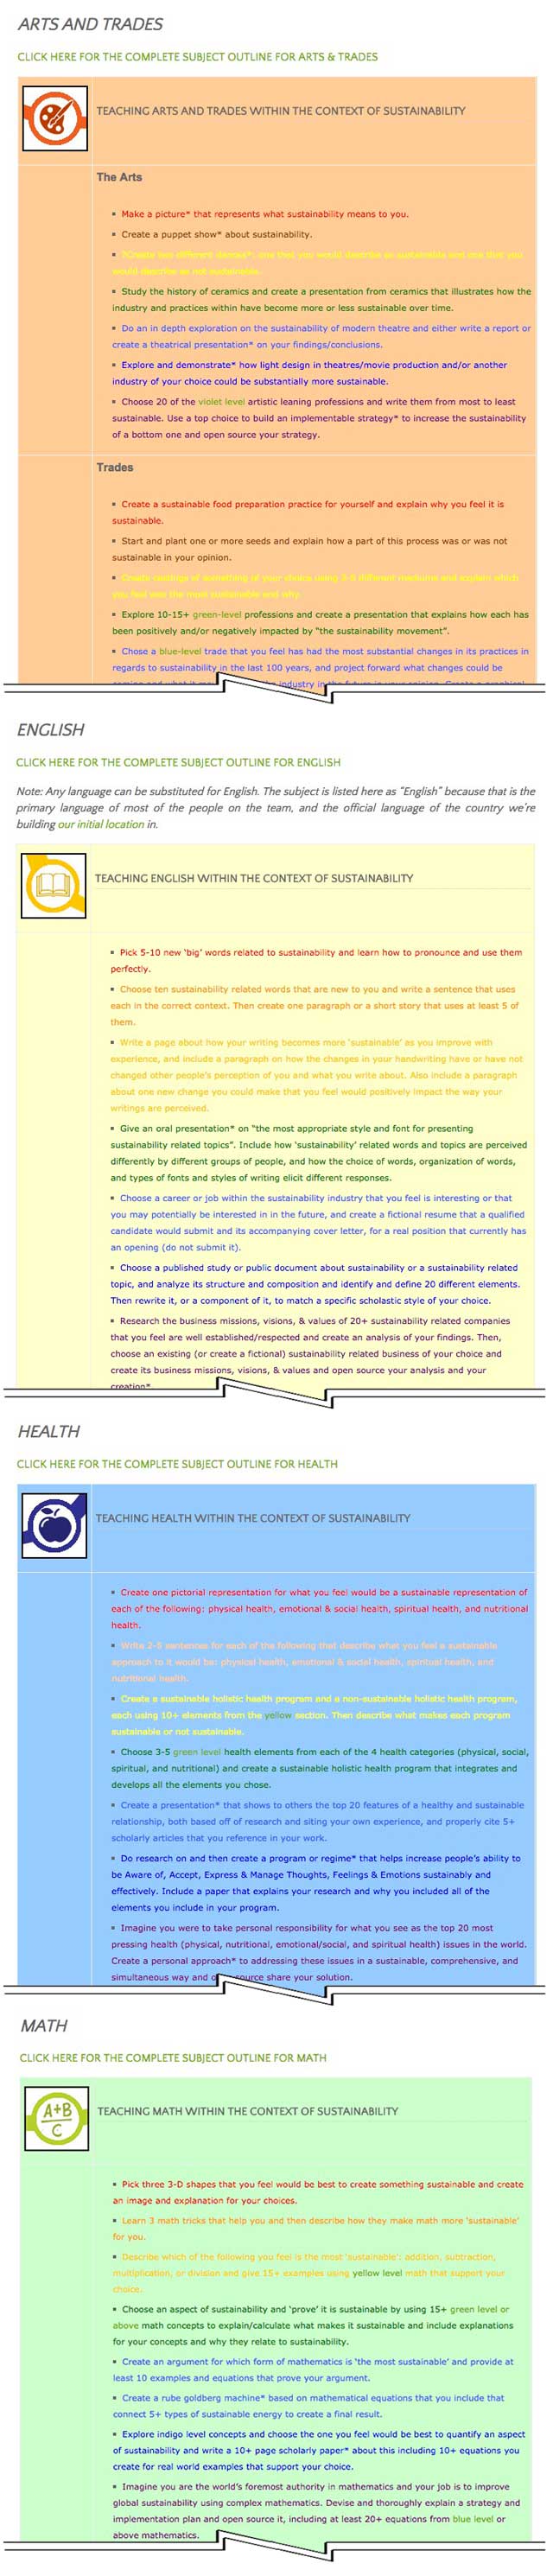 This last week the core team transferred the first 50% of the written content for the Sustainability Lesson Plan to the website, as you see here. This lesson plan is purposed to teach all subjects, to all learning levels, in any learning environment, using the central theme of "Sustainability."